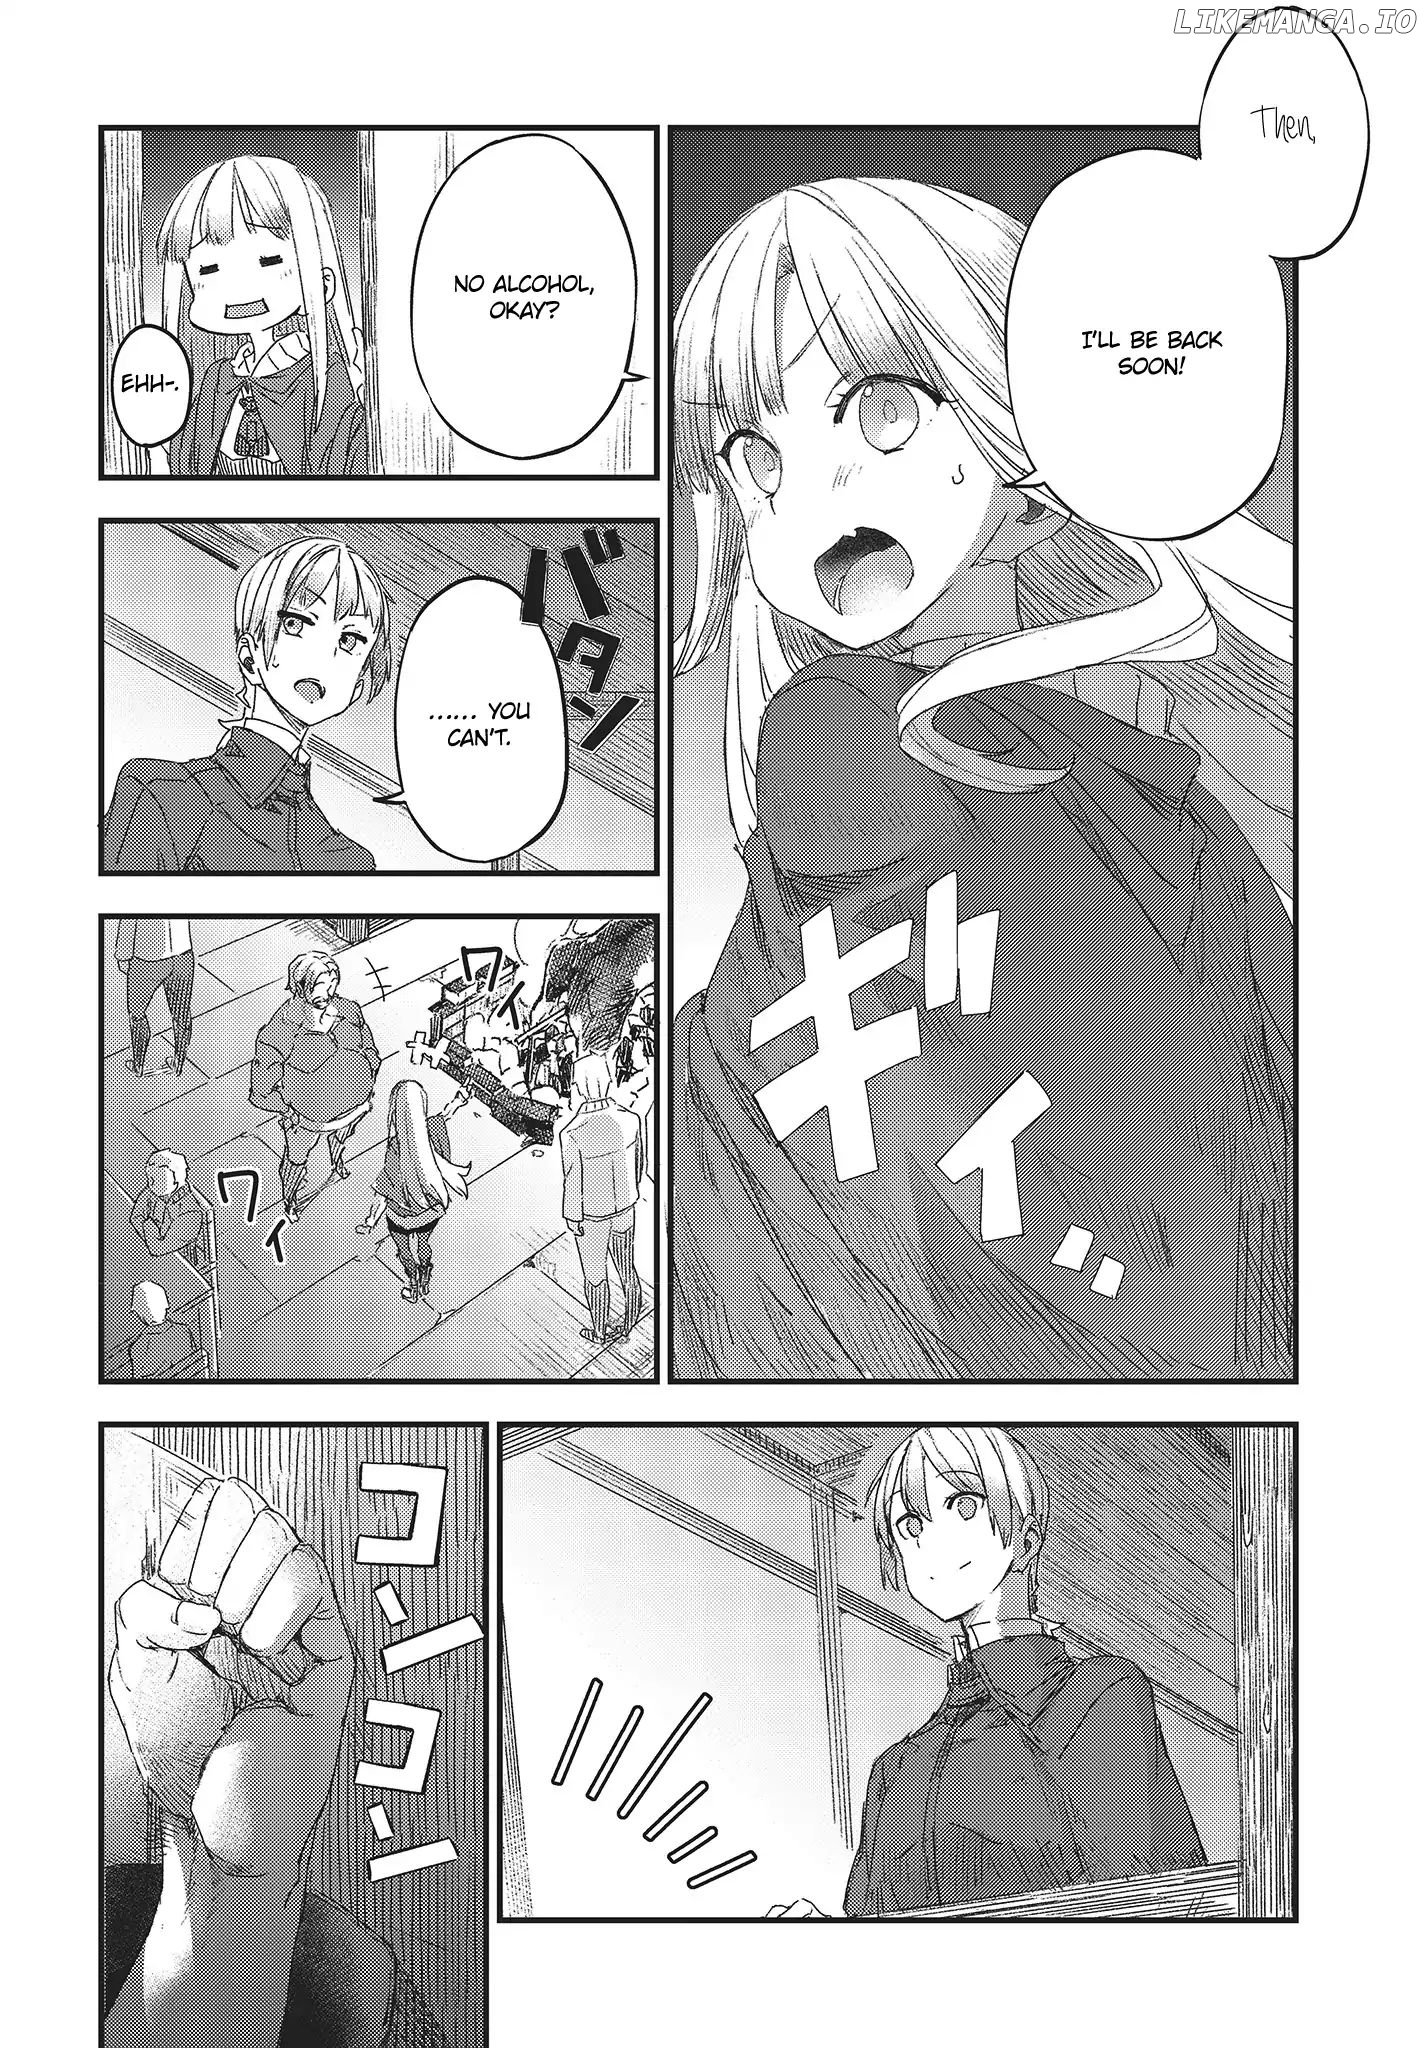 Wolf & Parchment: New Theory Spice & Wolf chapter 2 - page 11